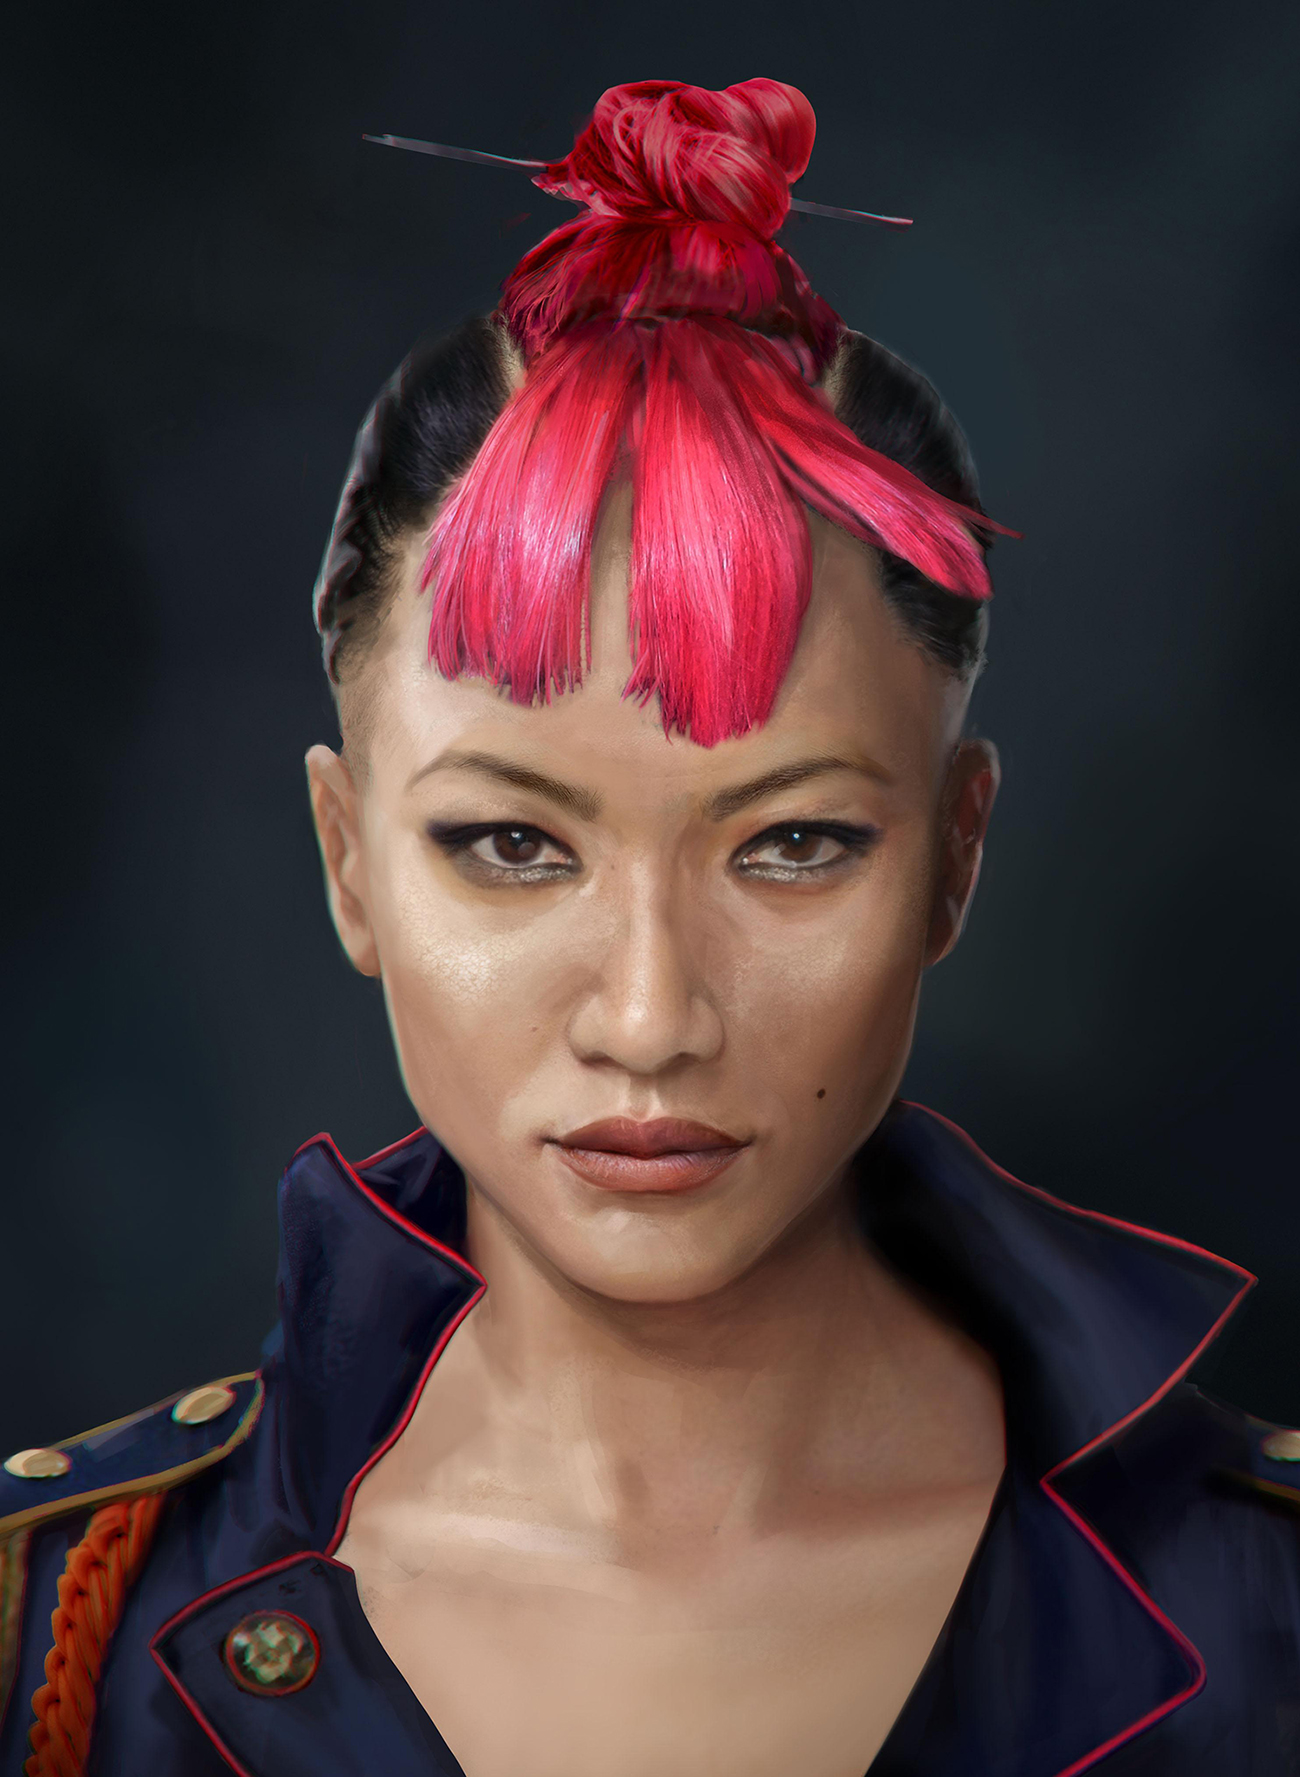 Far Cry 4 Porn - Someone Please Make Some Rule 34 for Yuma from Far Cry 4 â€“ Nerd Porn!